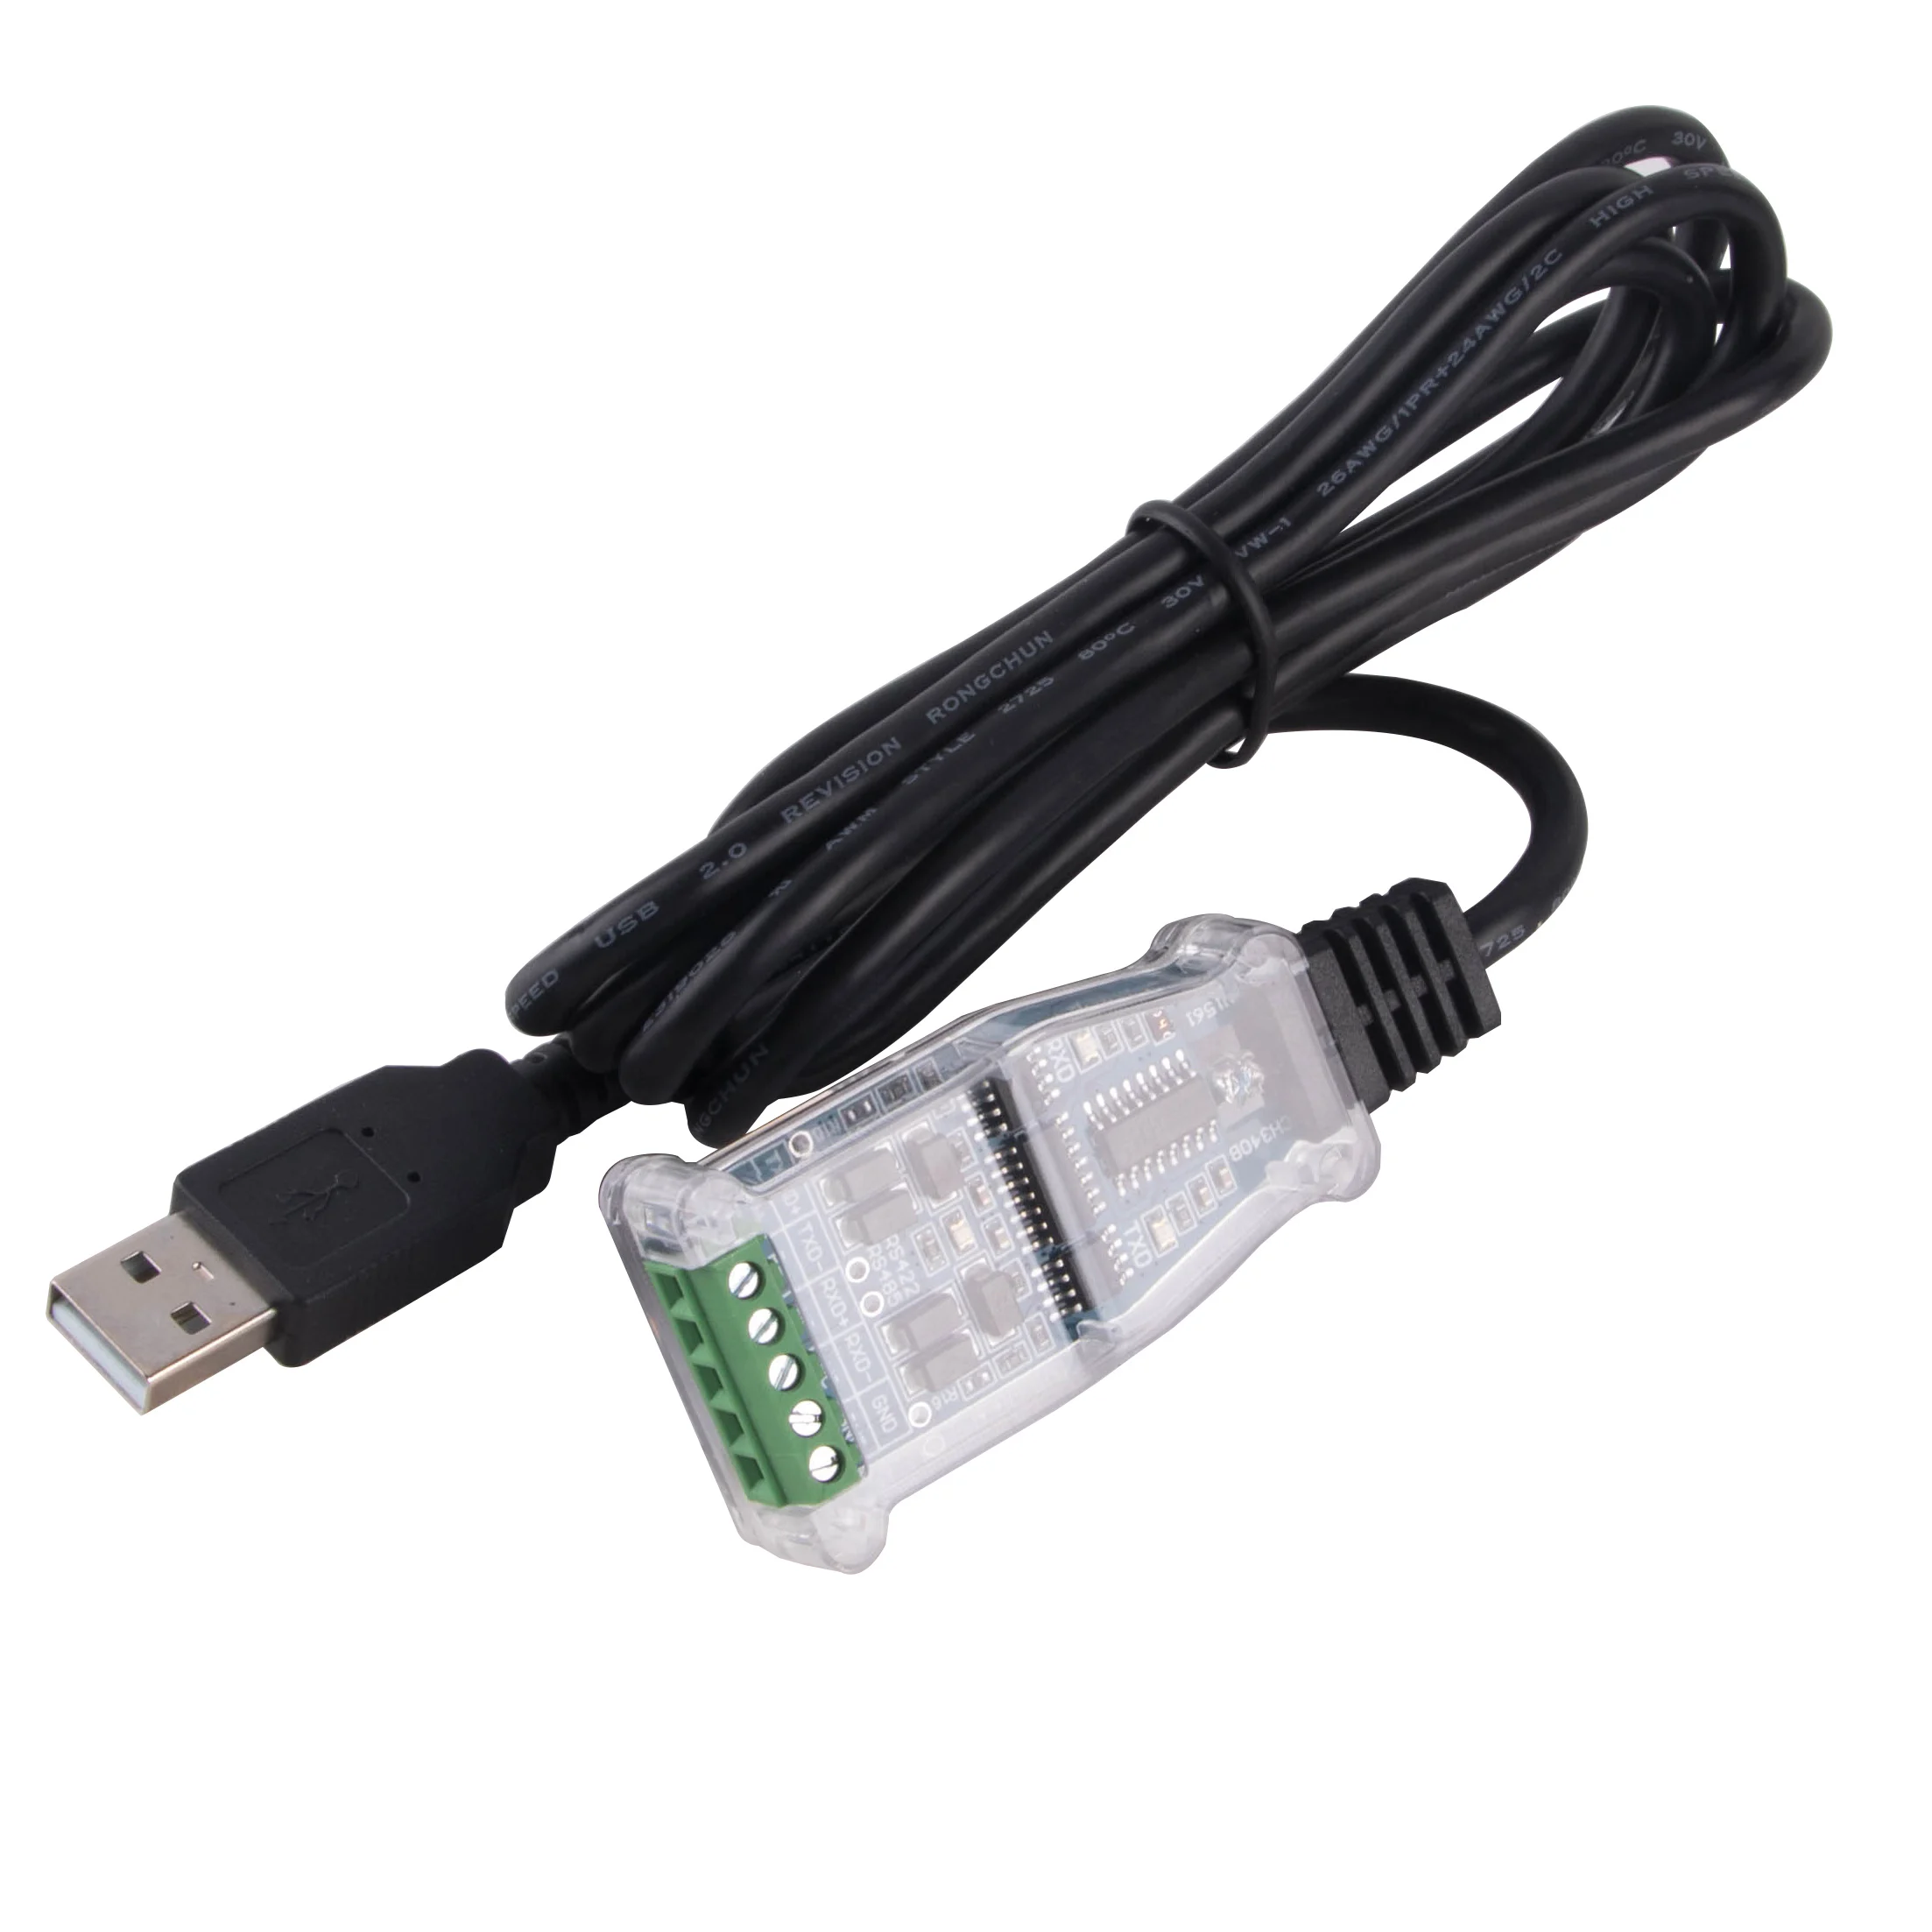 USB2.0 to RS485 Serial Converter Adapter CH340G Support Windows XP/7/8/MAC/Linux 